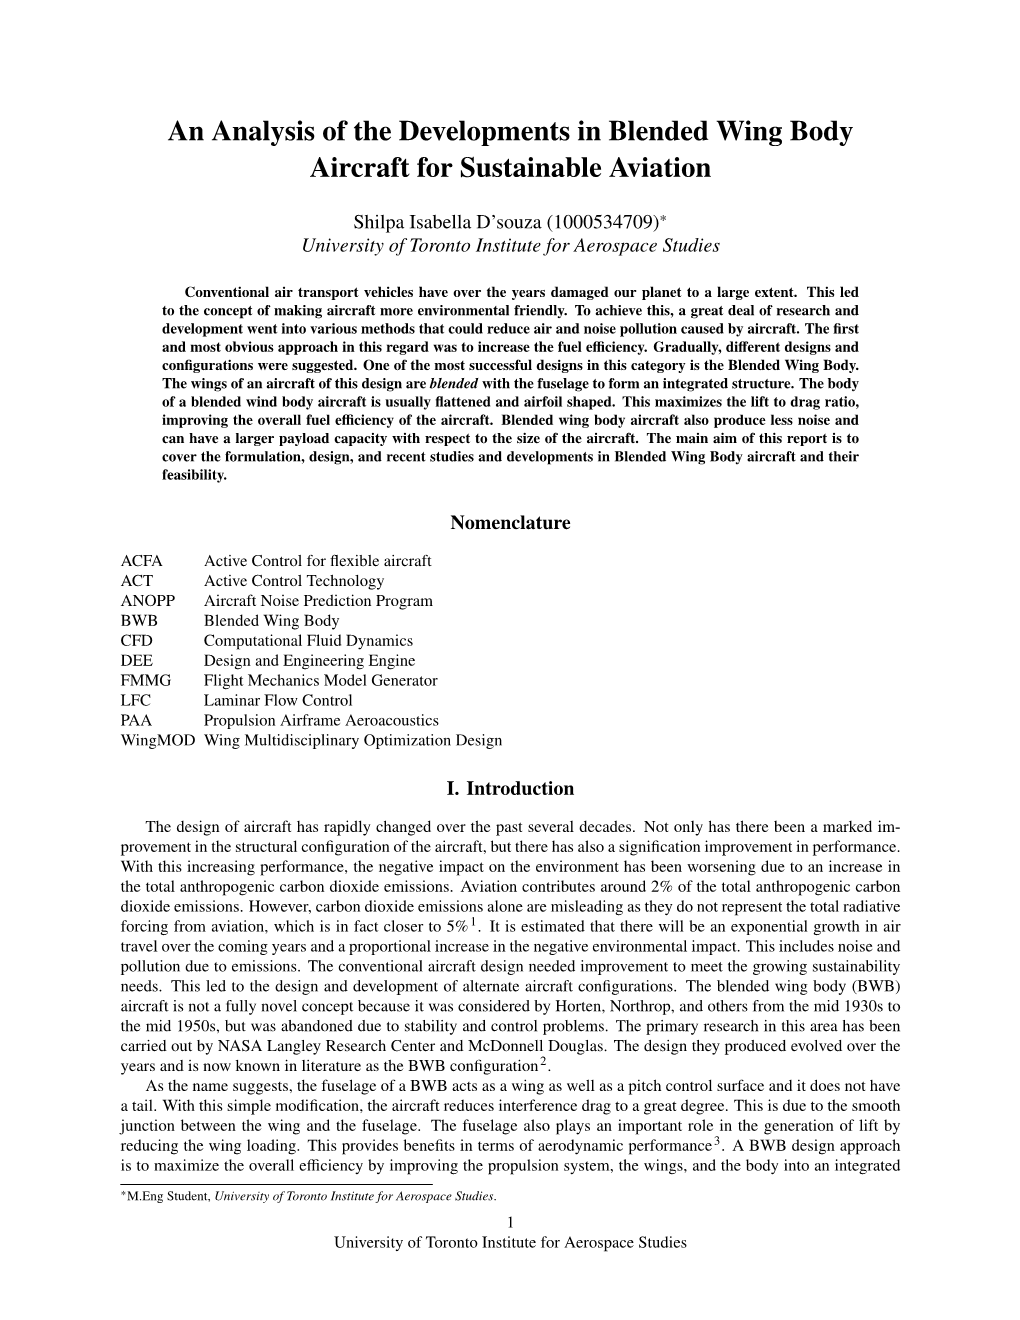 An Analysis of the Developments in Blended Wing Body Aircraft for Sustainable Aviation